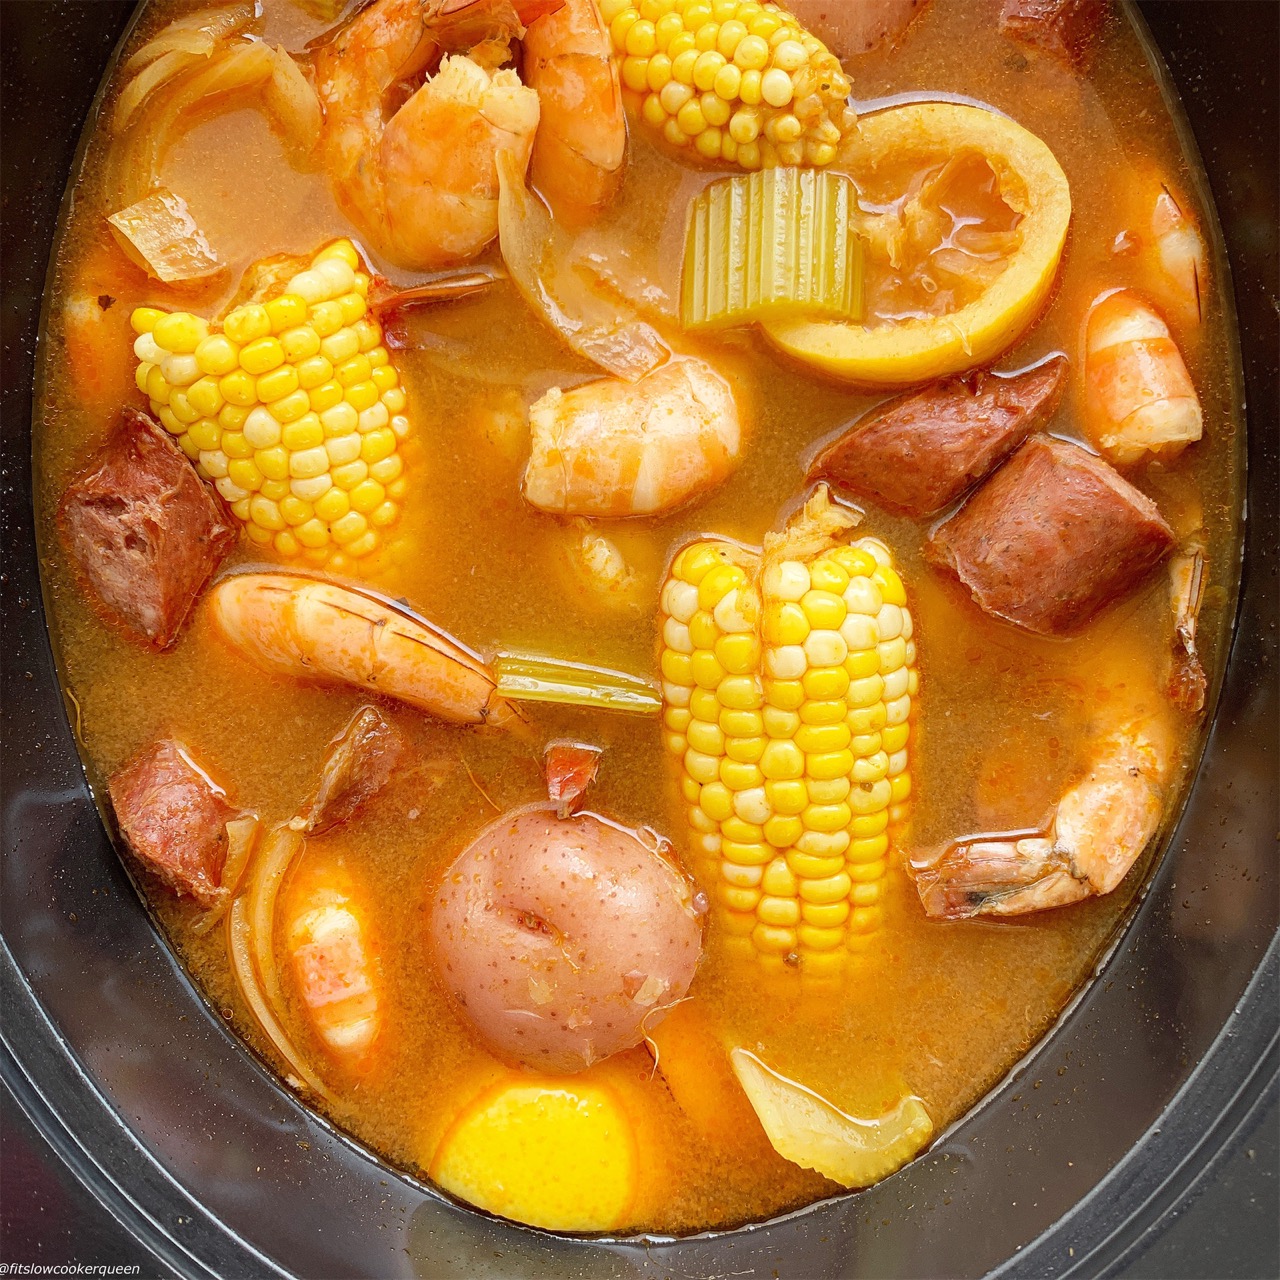 Cajun seasoning spices up this easy slow cooker low country boil. Simple yet packed full of flavor,  you can serve this Cajun dish year-round.